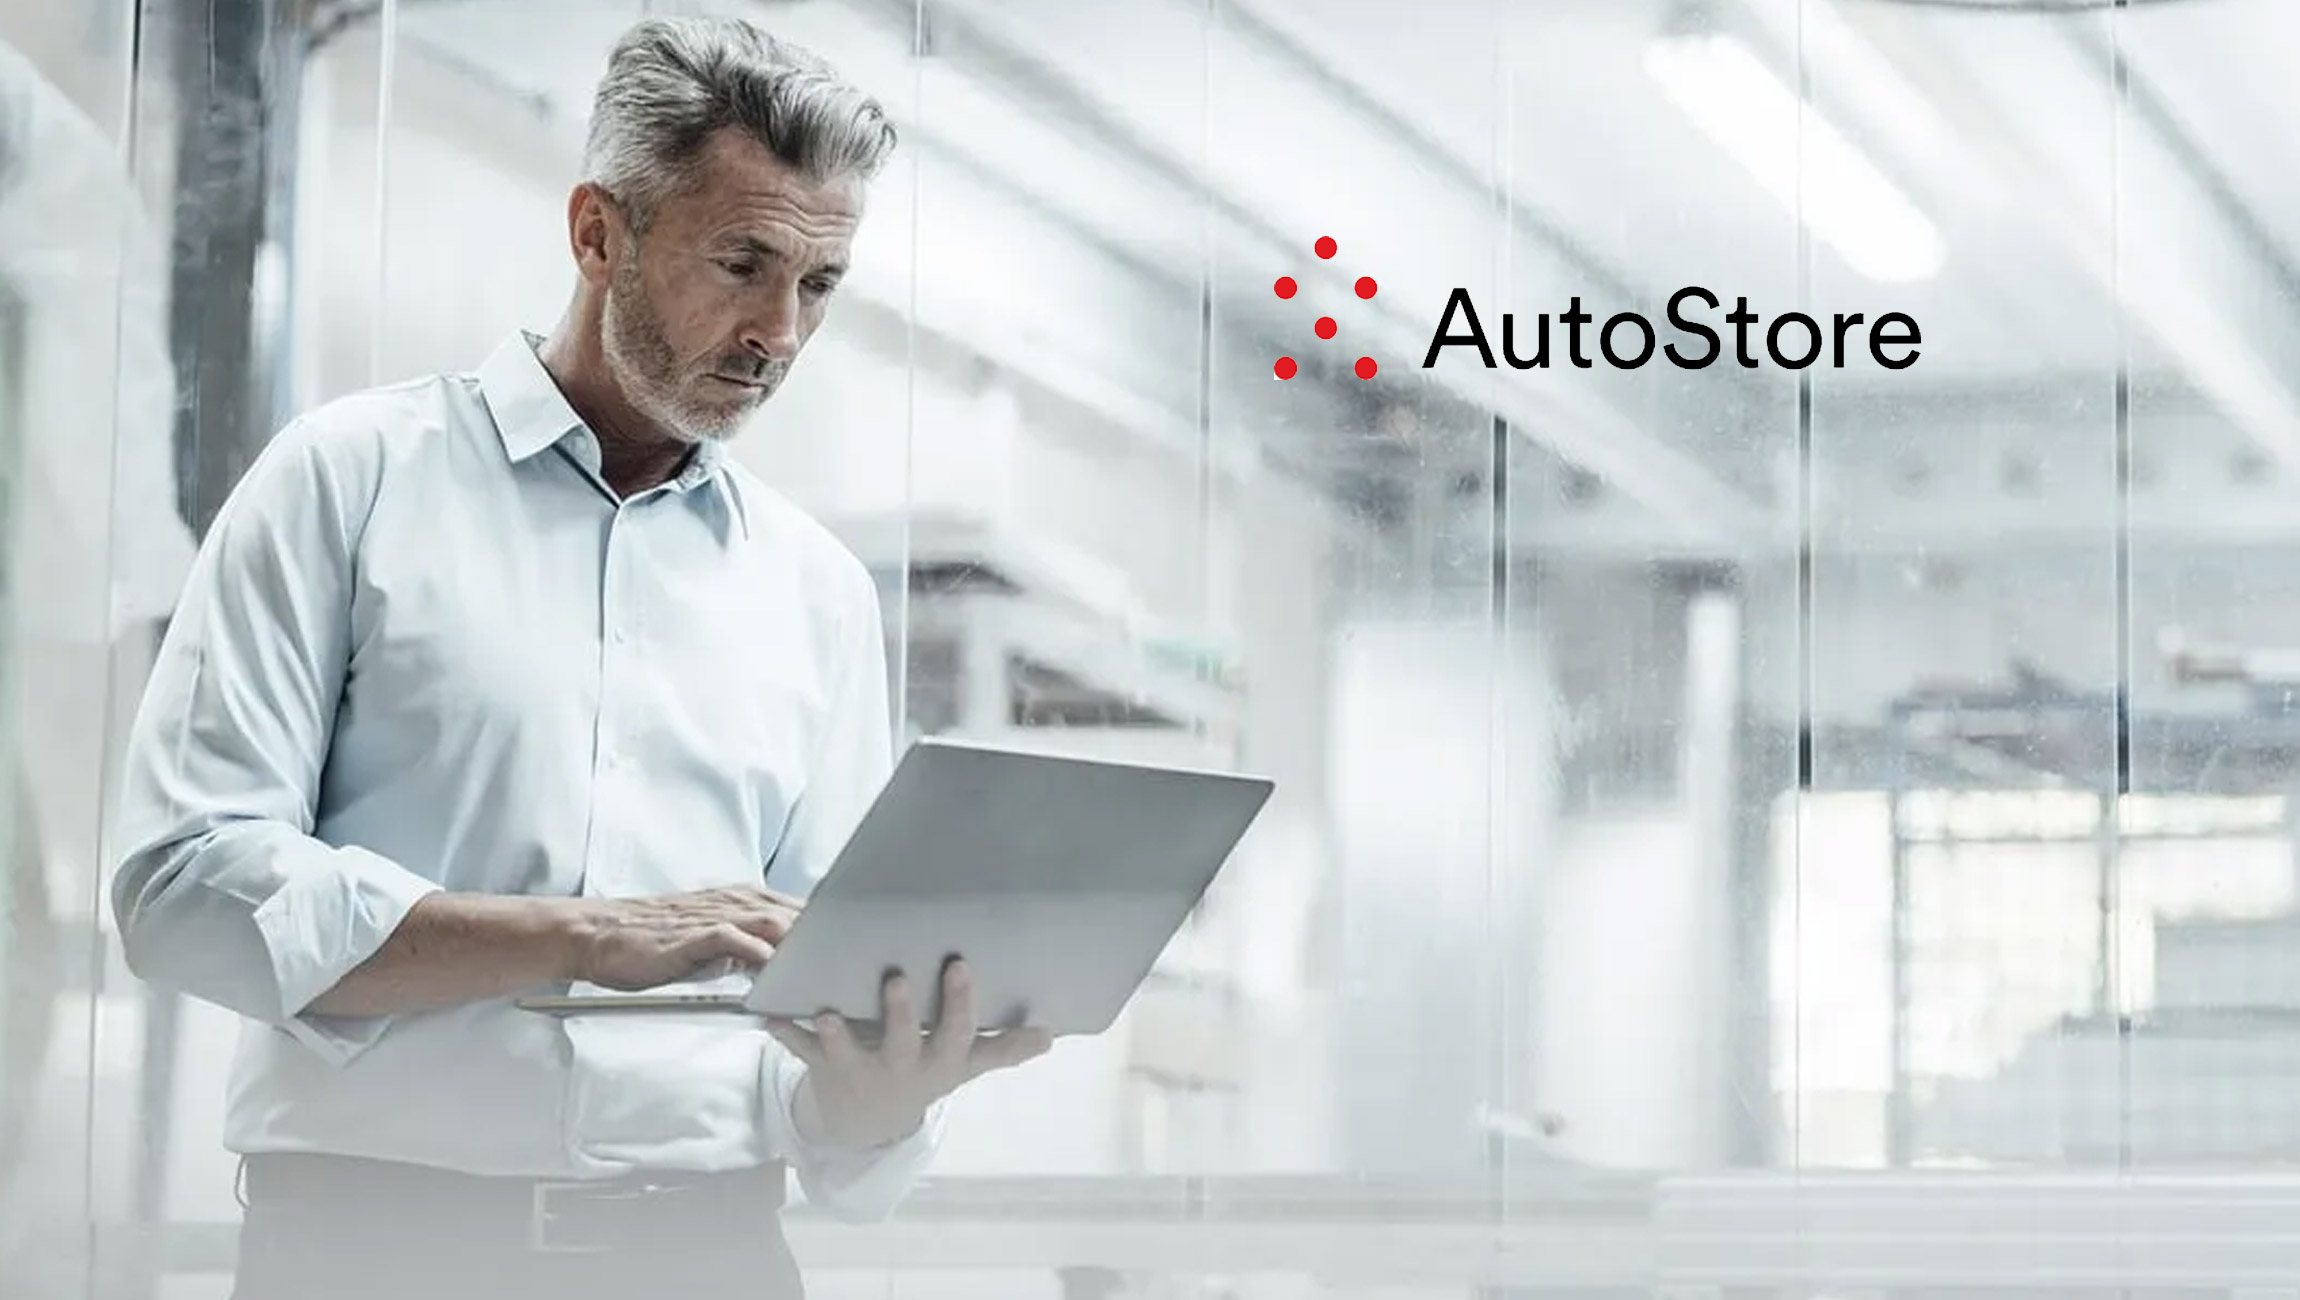 AutoStore Launches Pay-Per-Pick Service Option to Address Fast-Growing Demand for Fulfillment Automation